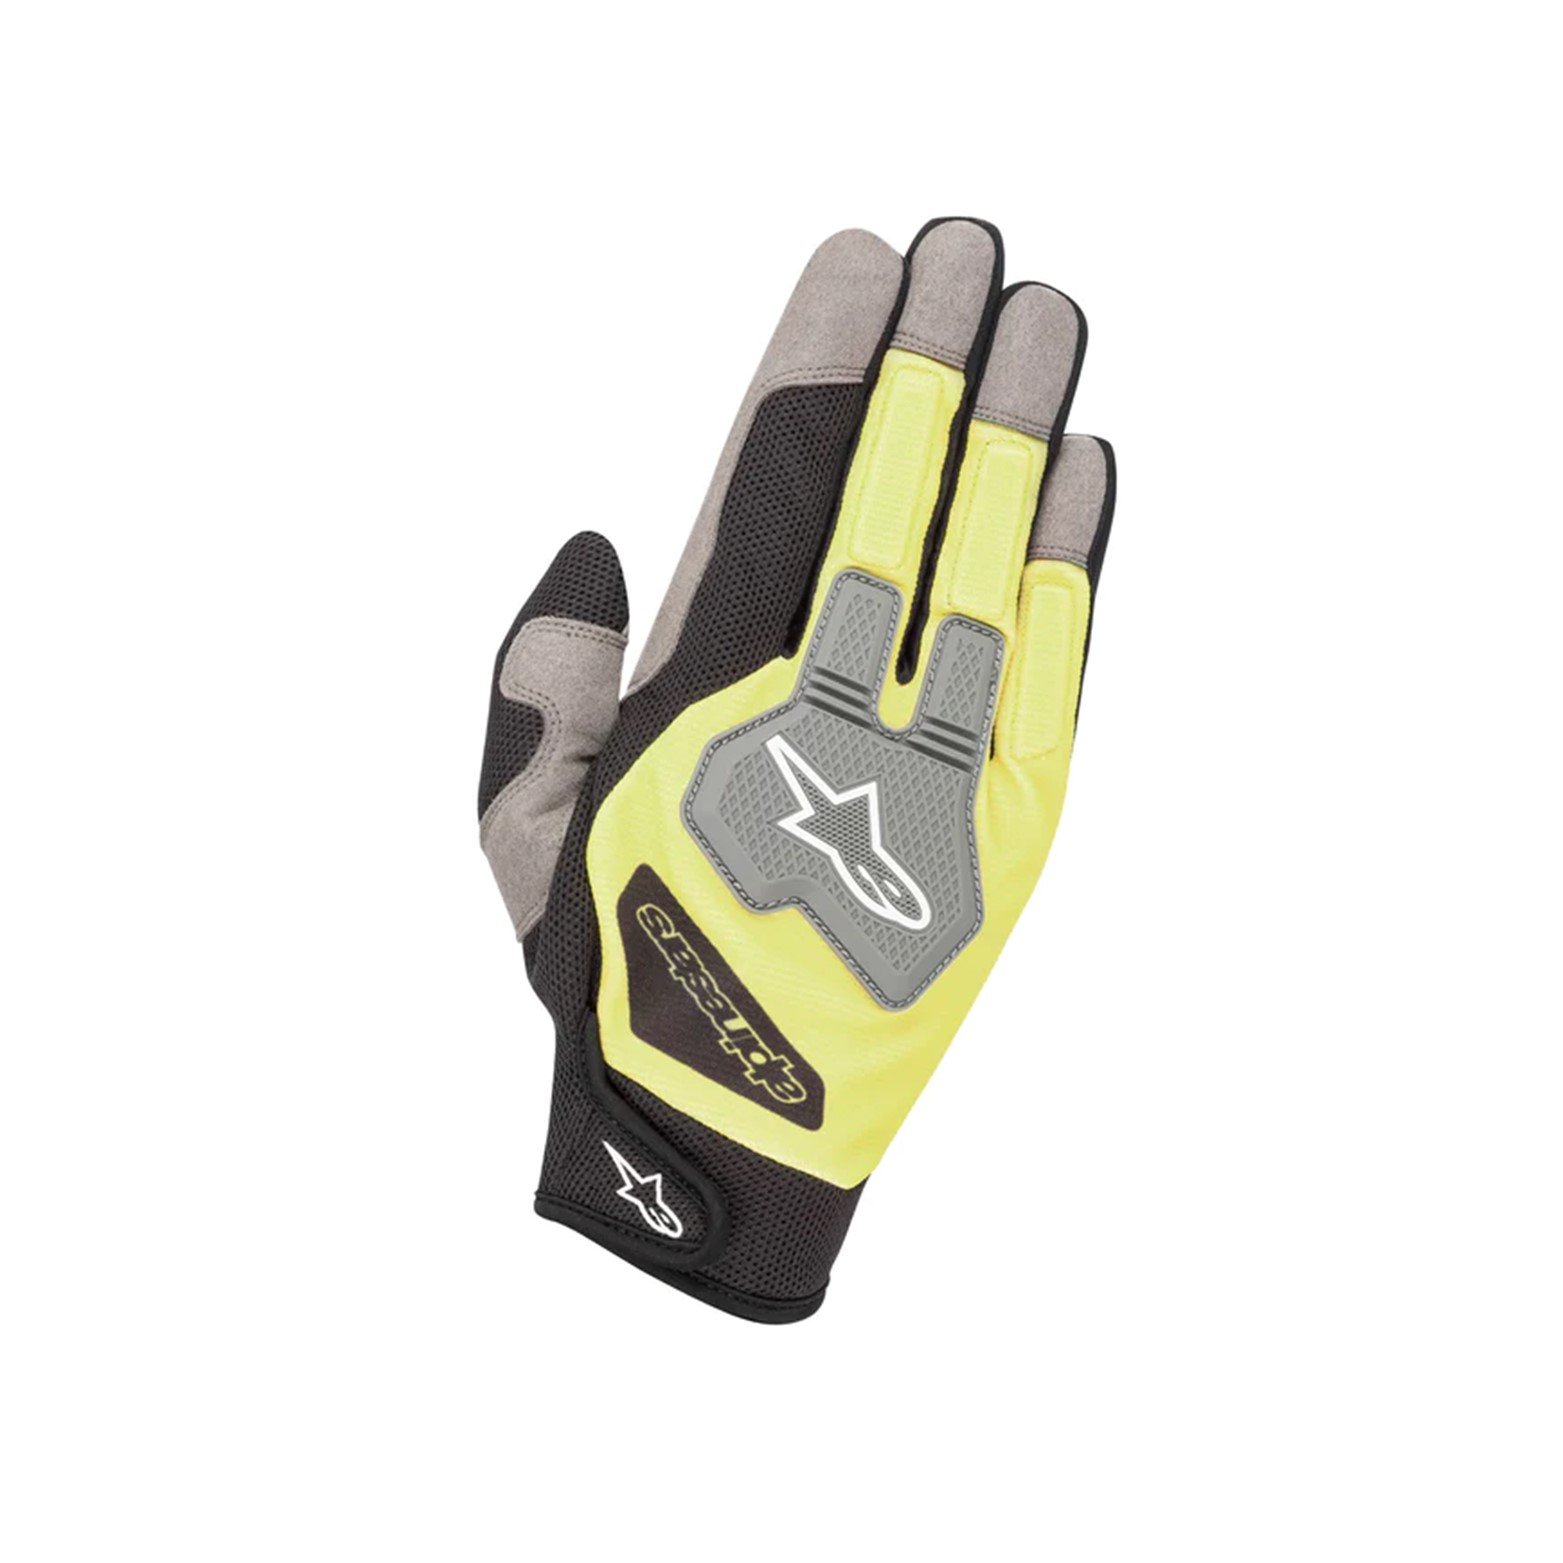 SPARCO USA on Instagram: The MECA 3 Pit Glove is the ultimate light-weight  glove for around the shop, on the trails or at the track. Available in 5  colors and sizes from